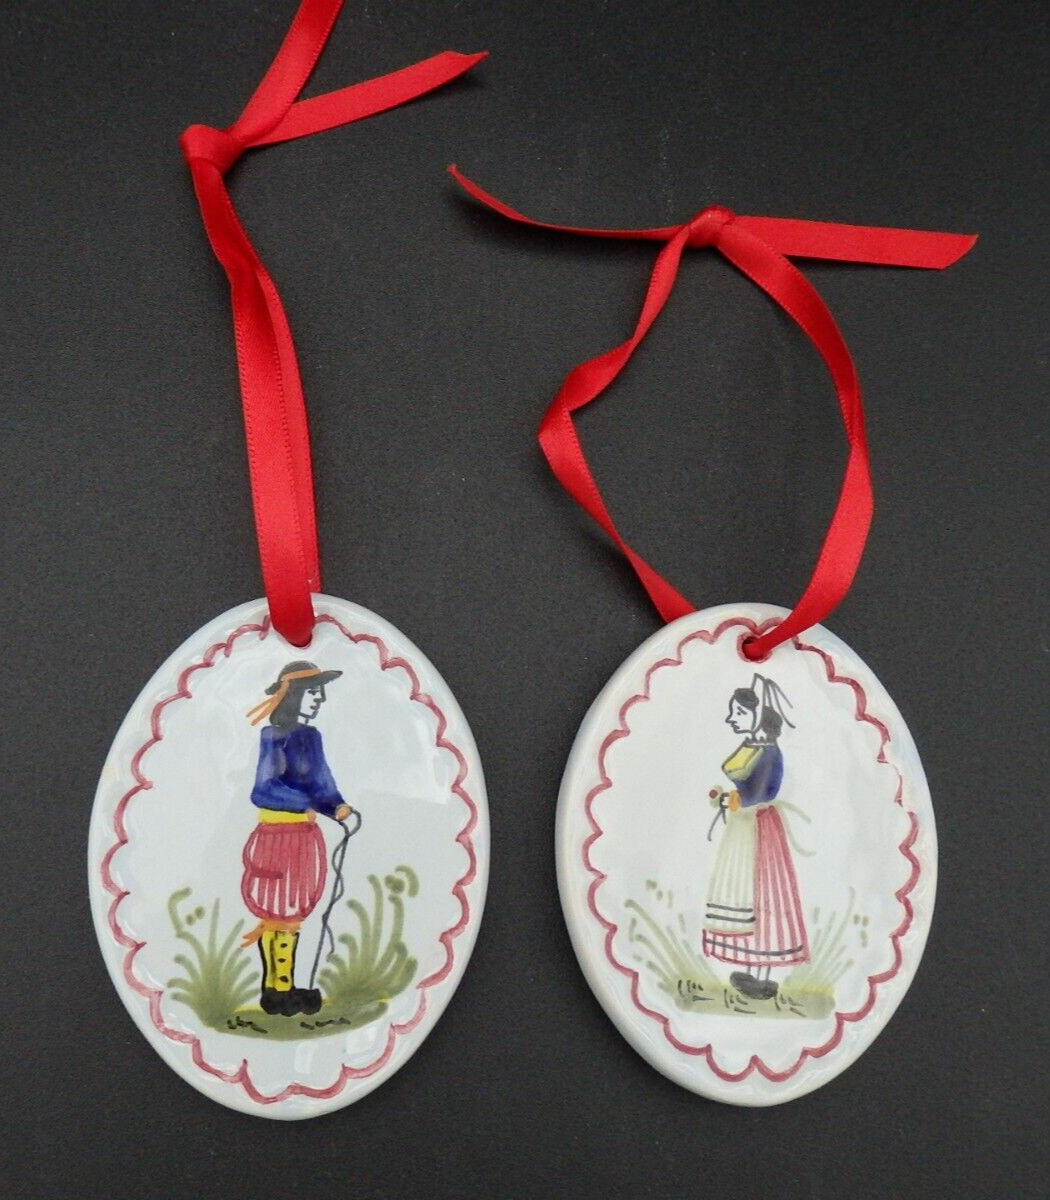 Henriot Quimper France Noel 1981 Hand Painted Ornaments Set of 2 Man and Woman